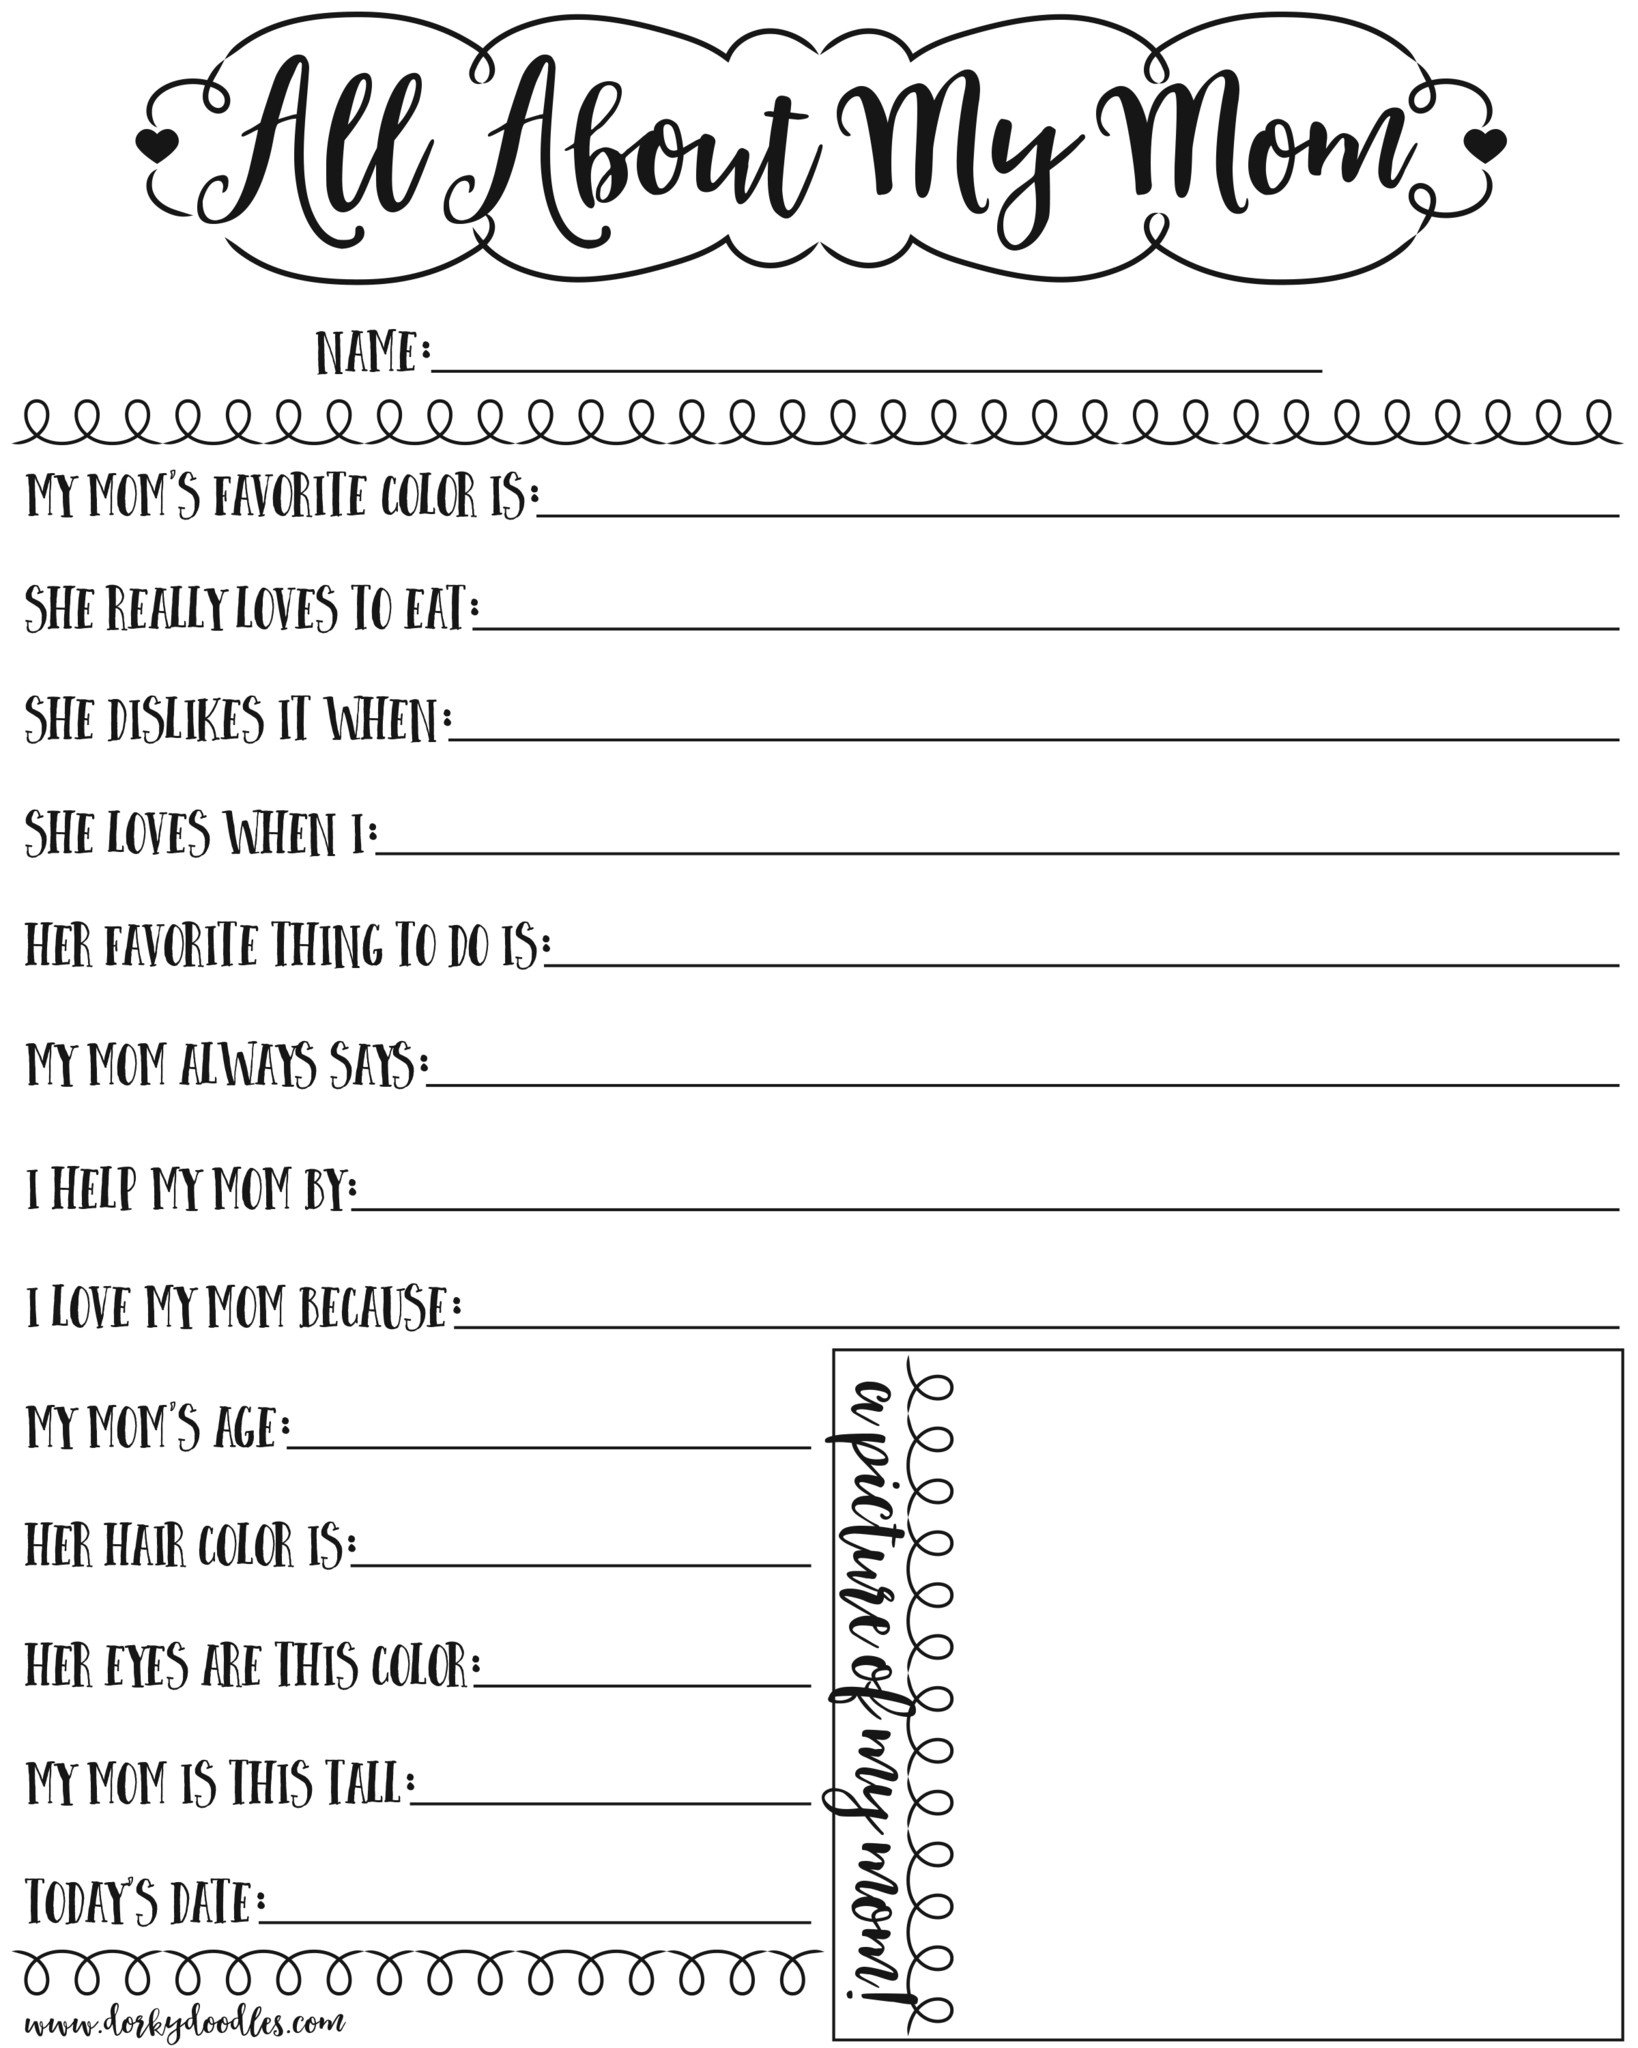 Mother S Day Quiz For Kids Free Printable – Dorky Doodles Best Ideas - Free Printable Mother&amp;amp;#039;s Day Questionnaire